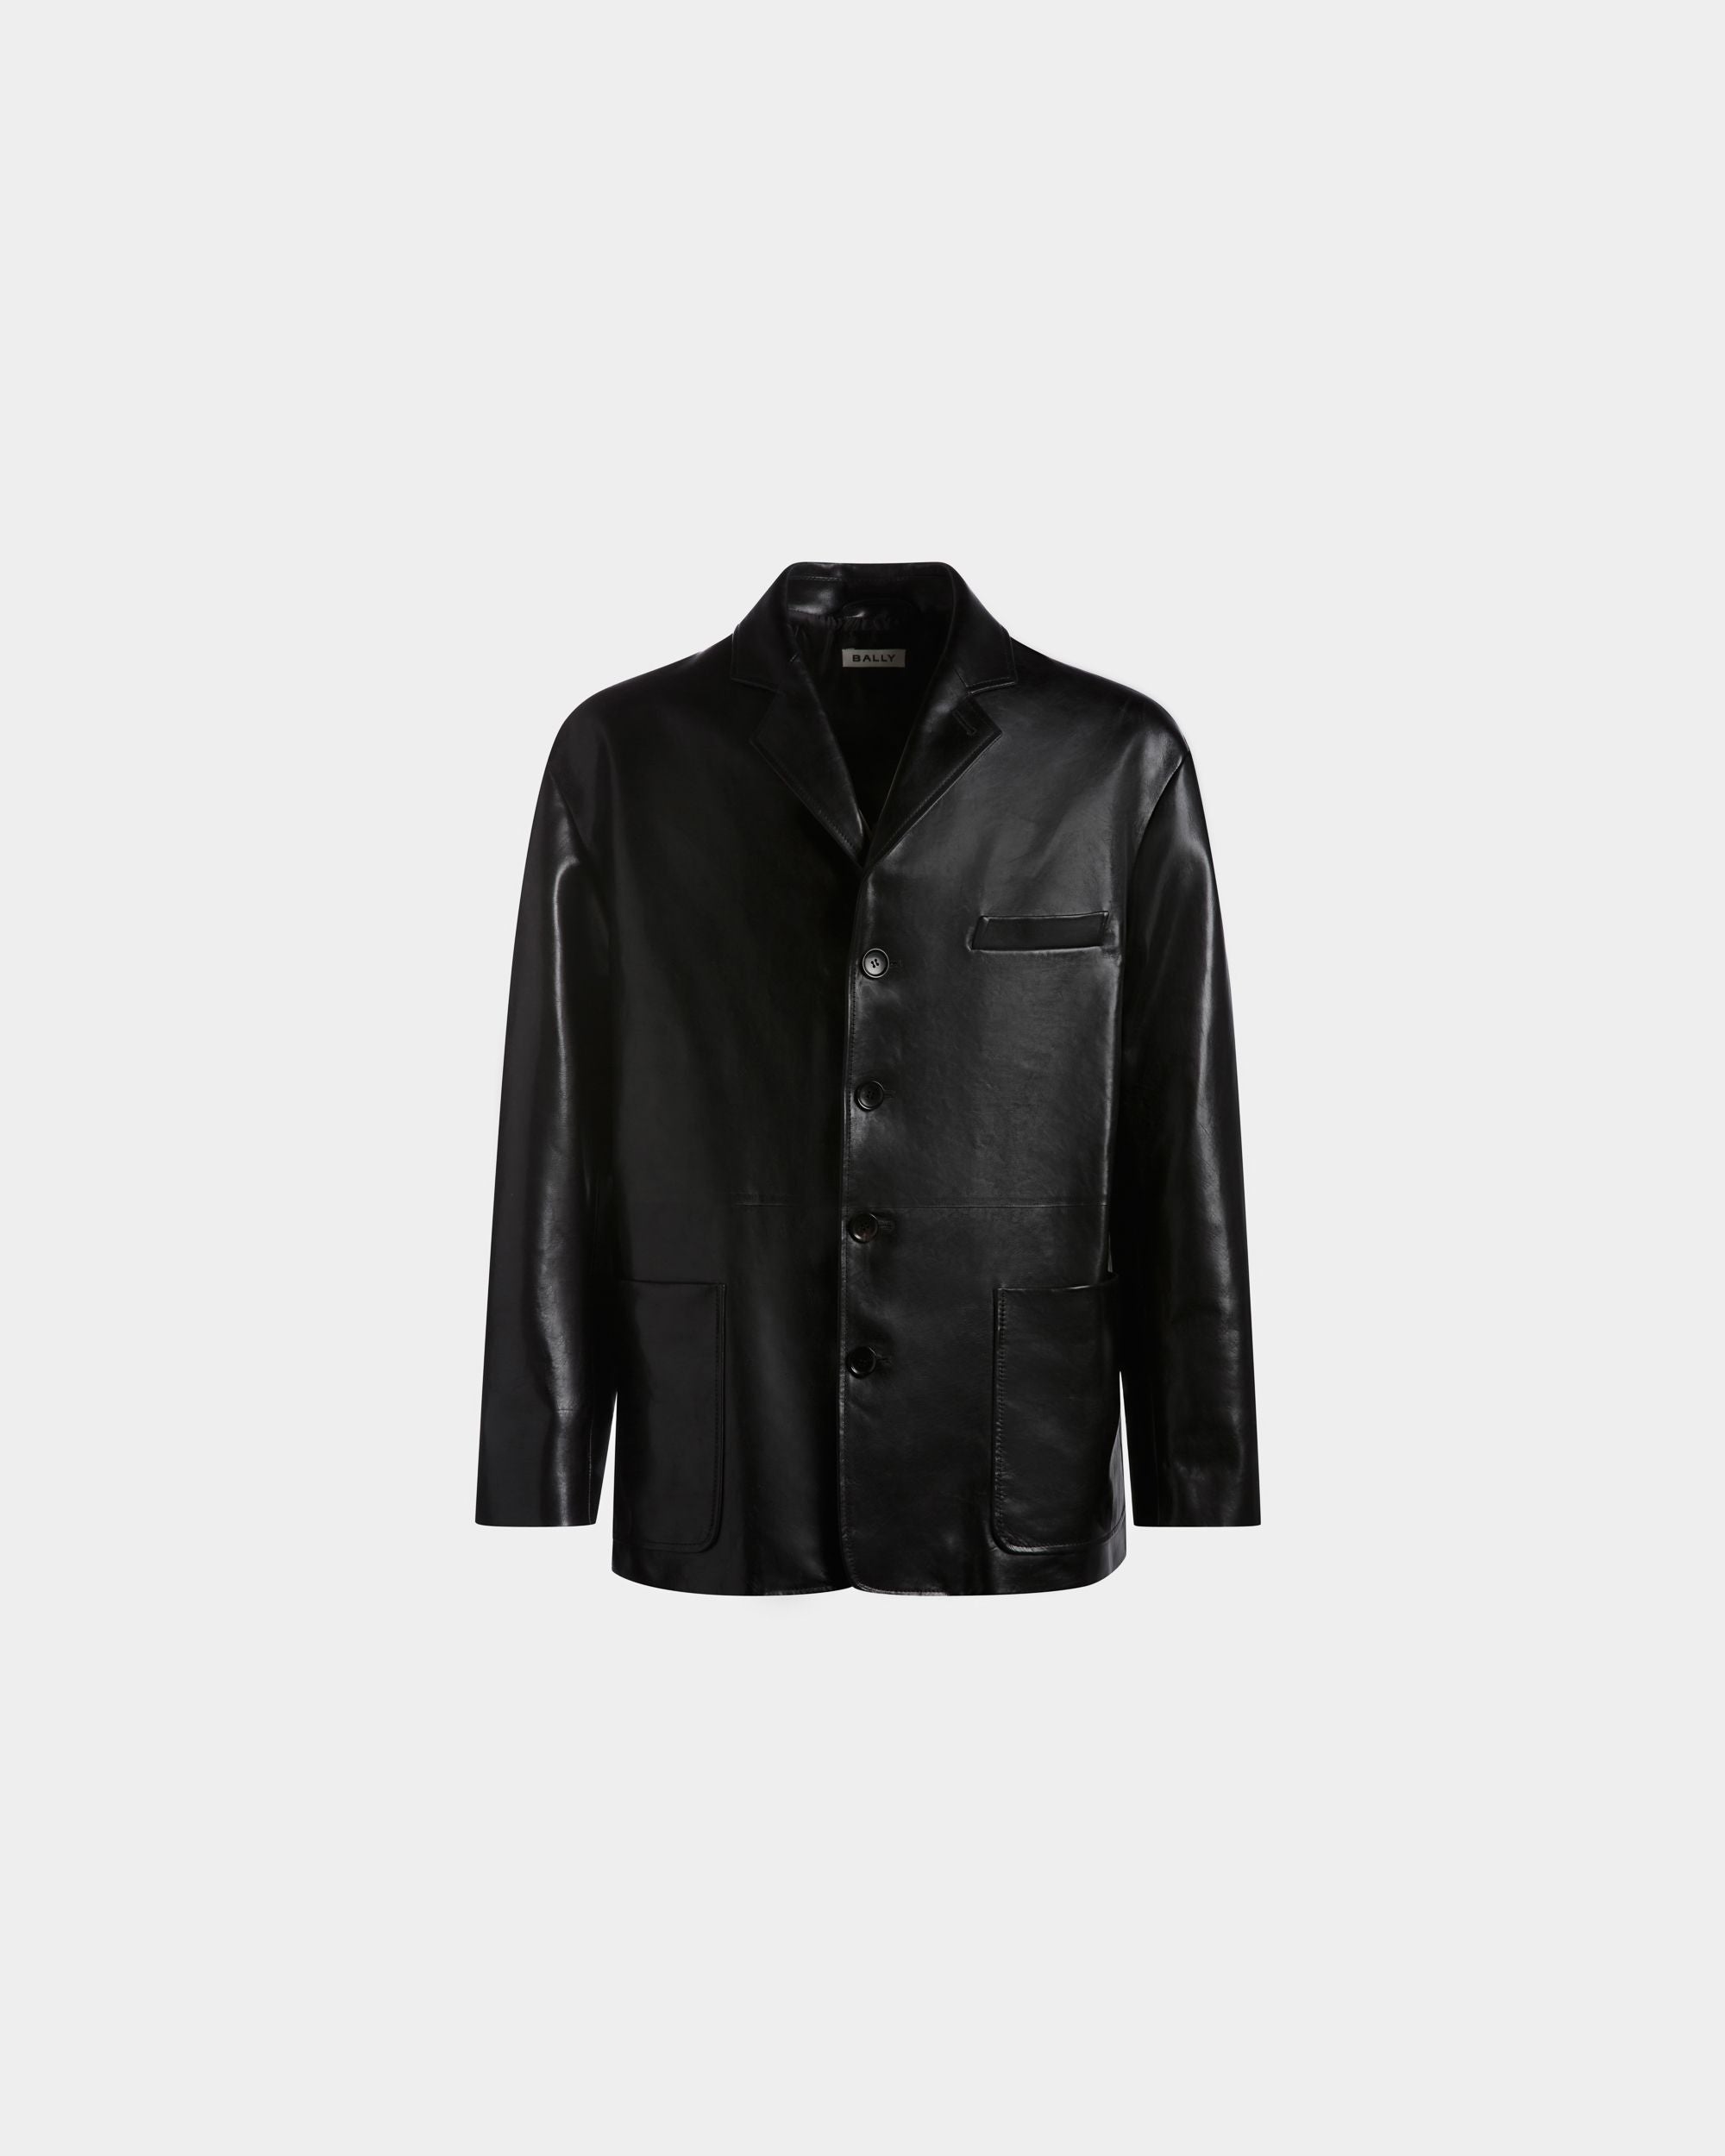 Men's Jacket in Black Leather | Bally | Still Life Front